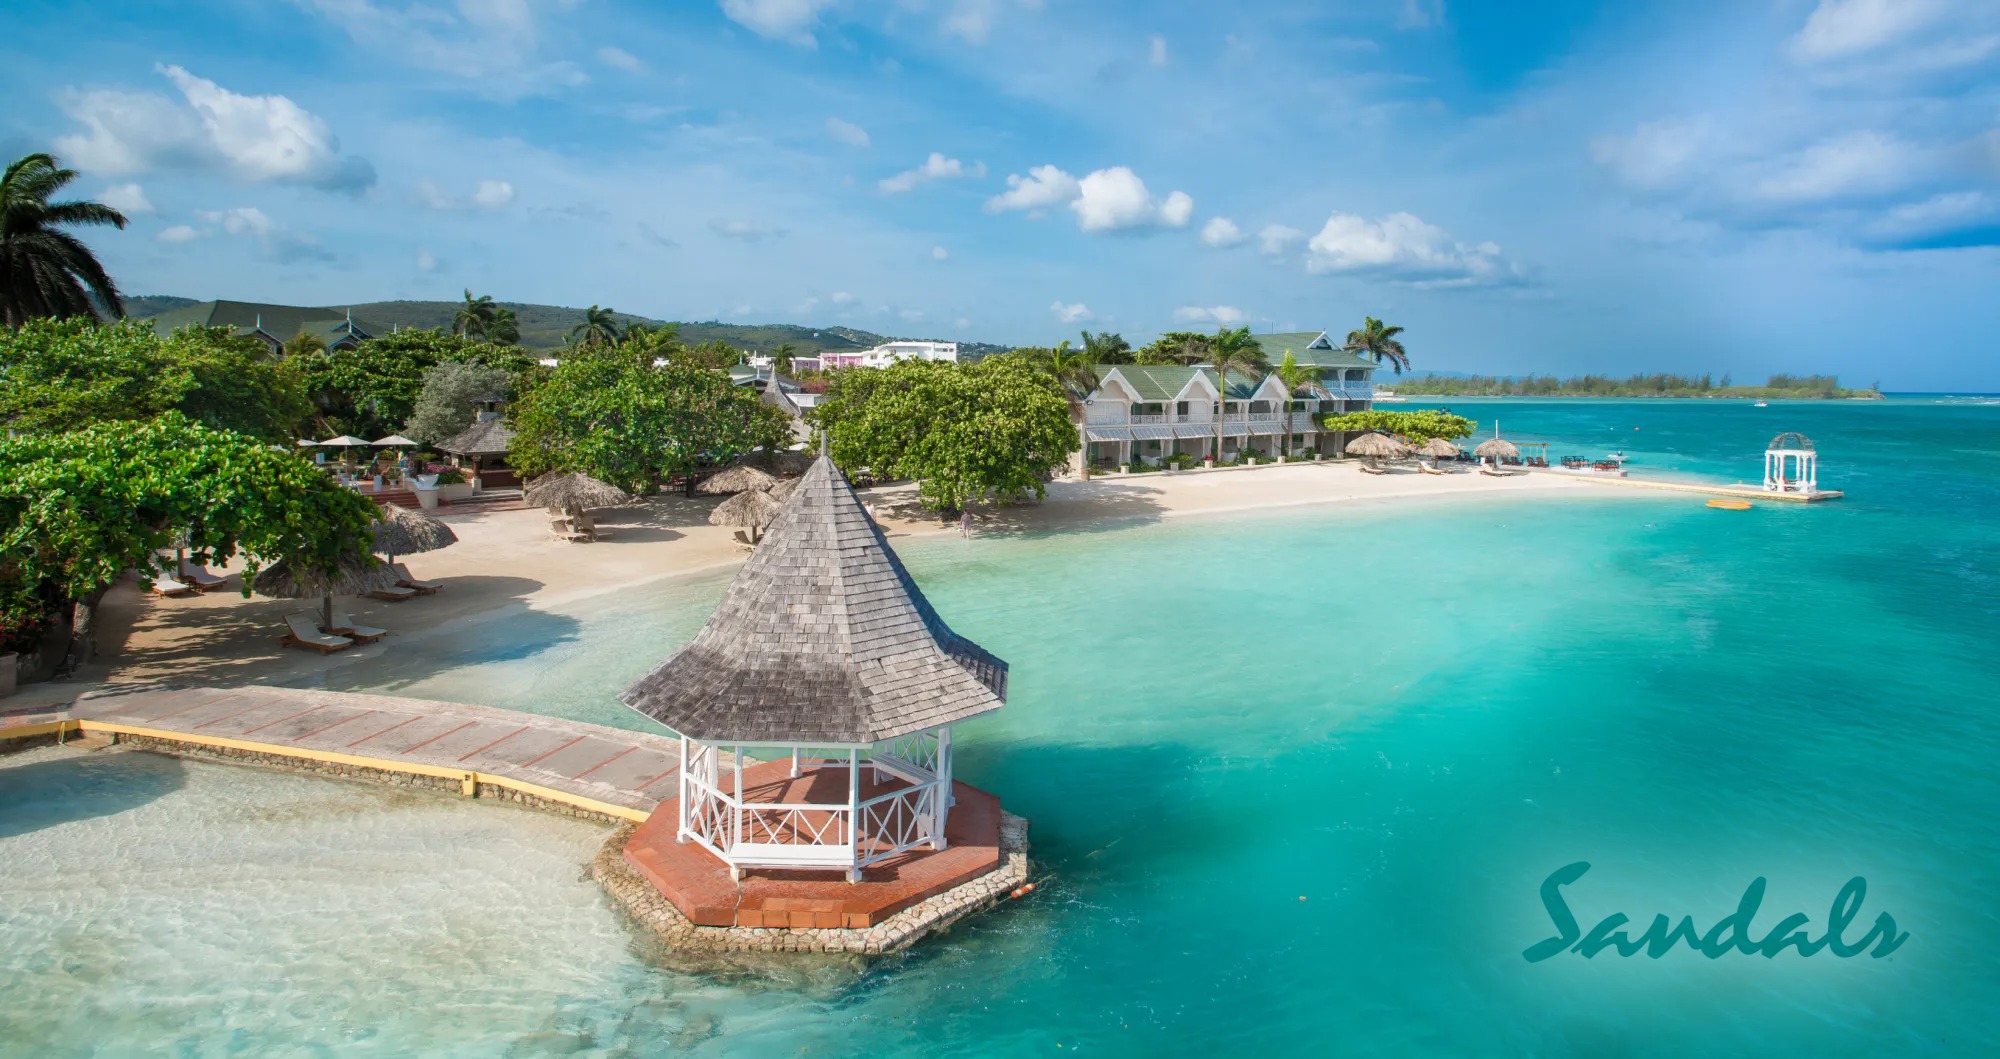 Enveloped in the shade of palm trees, a white gazebo complements the crystalline blue water and pristine sand, illustrating the tranquil beauty of Royal Caribbean's private beach locations_